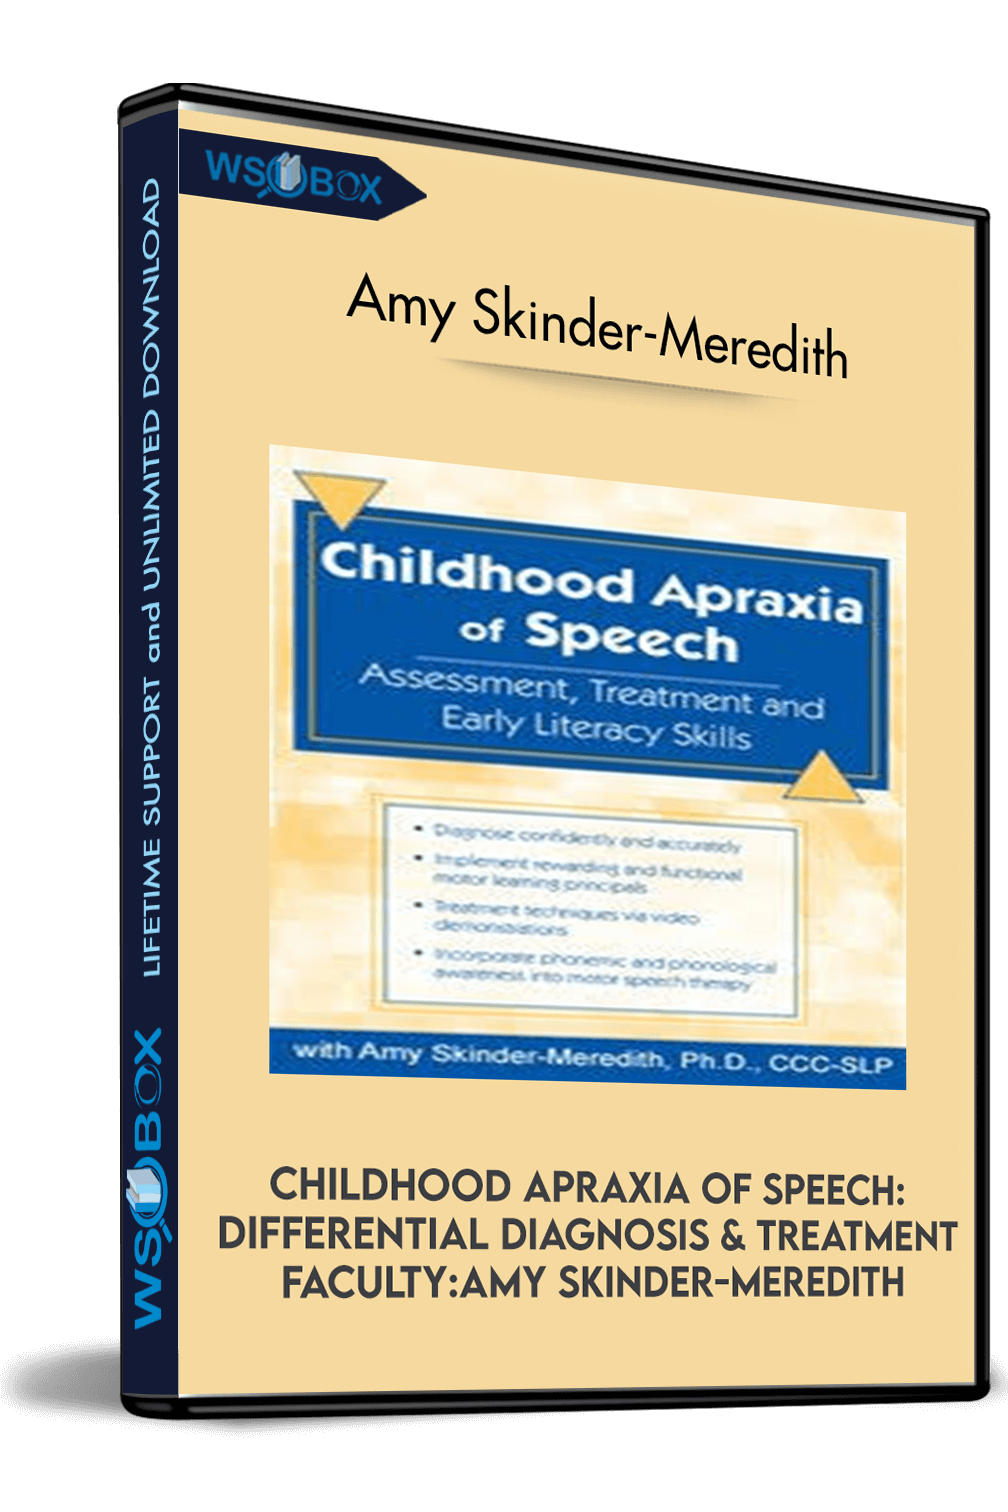 Amy Skinder-Meredith – Childhood Apraxia of Speech: Differential Diagnosis & Treatment Faculty